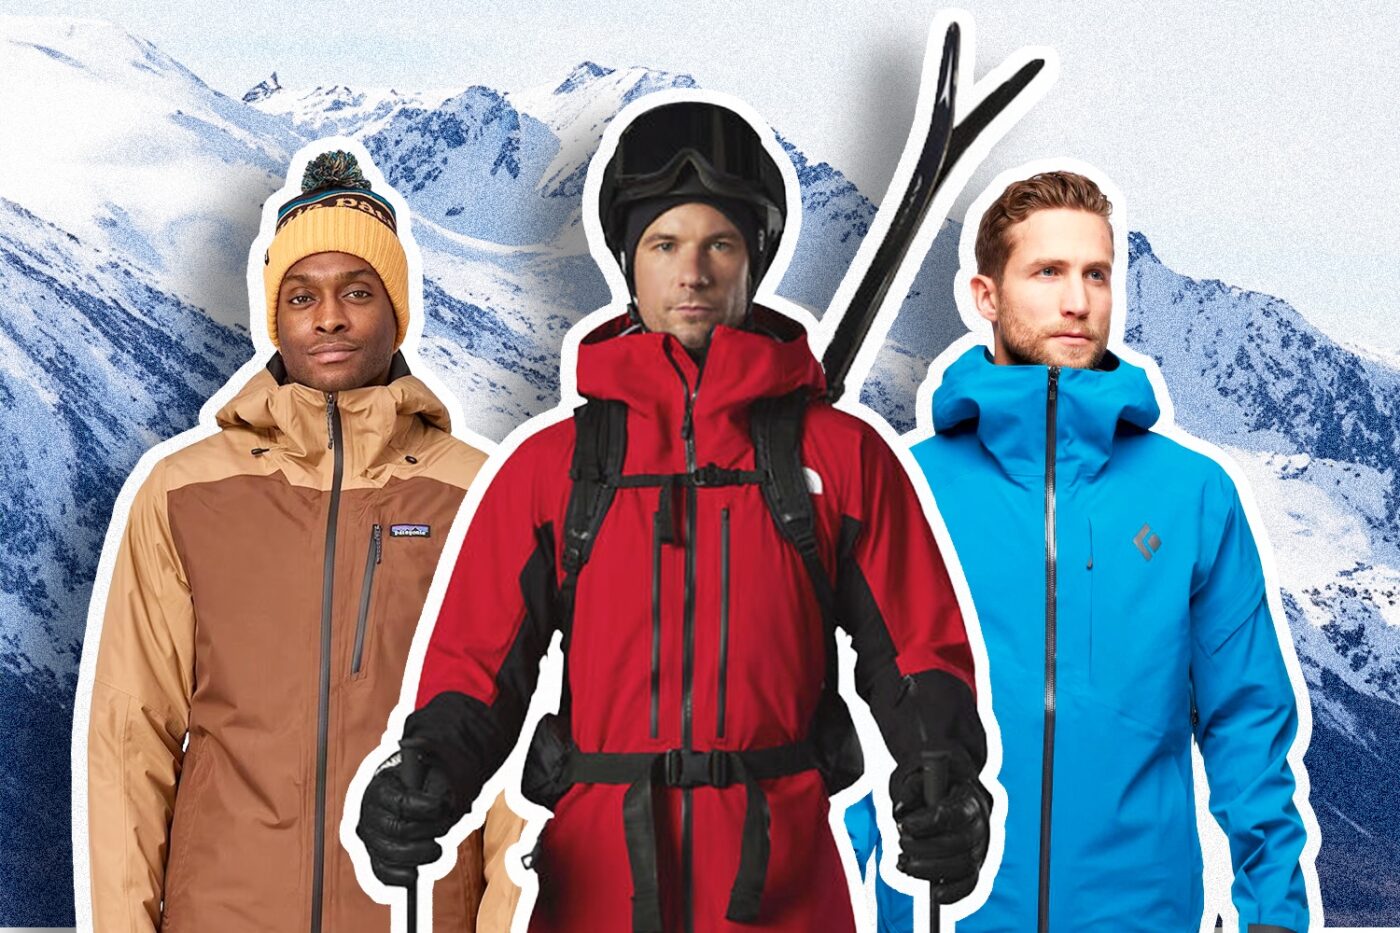 Luxury Ski Clothing  What to Wear on the Ski Slopes to Really Standout